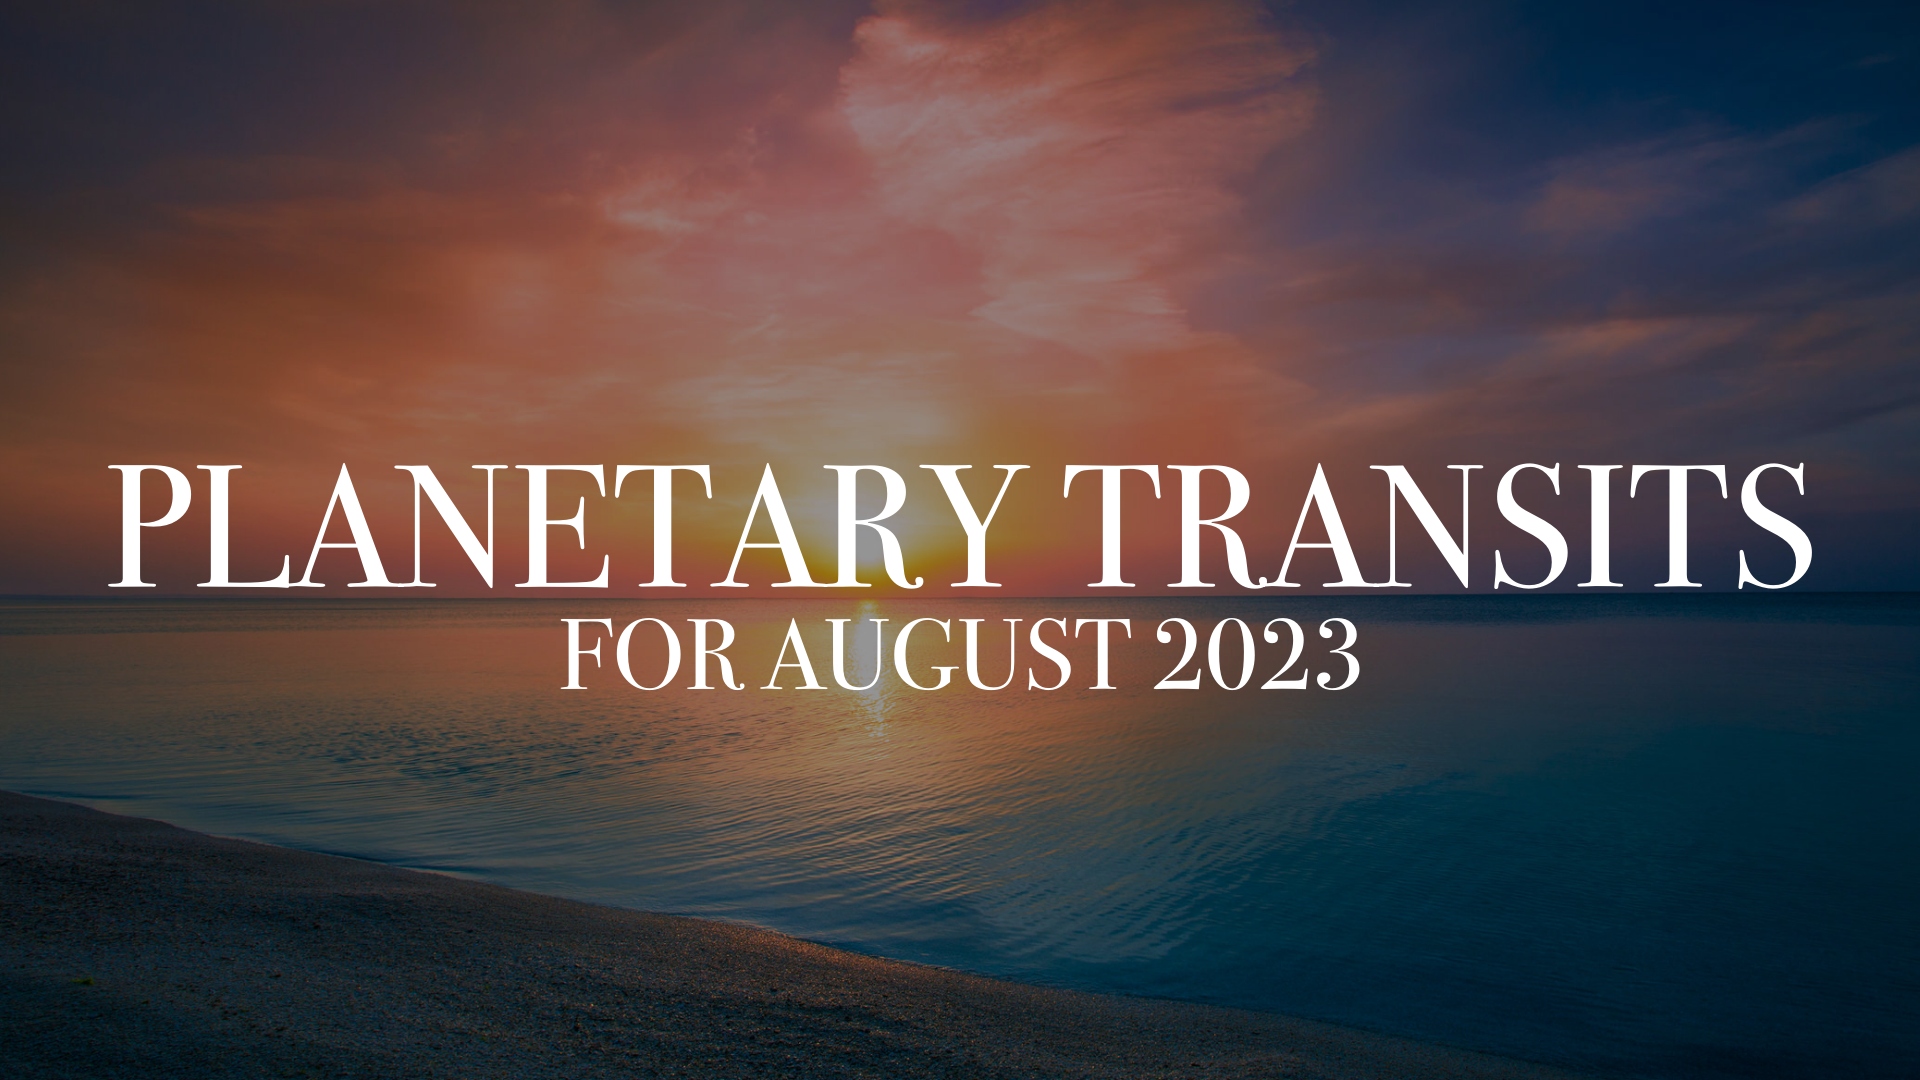 PLANETARY TRANSITS for august 2023